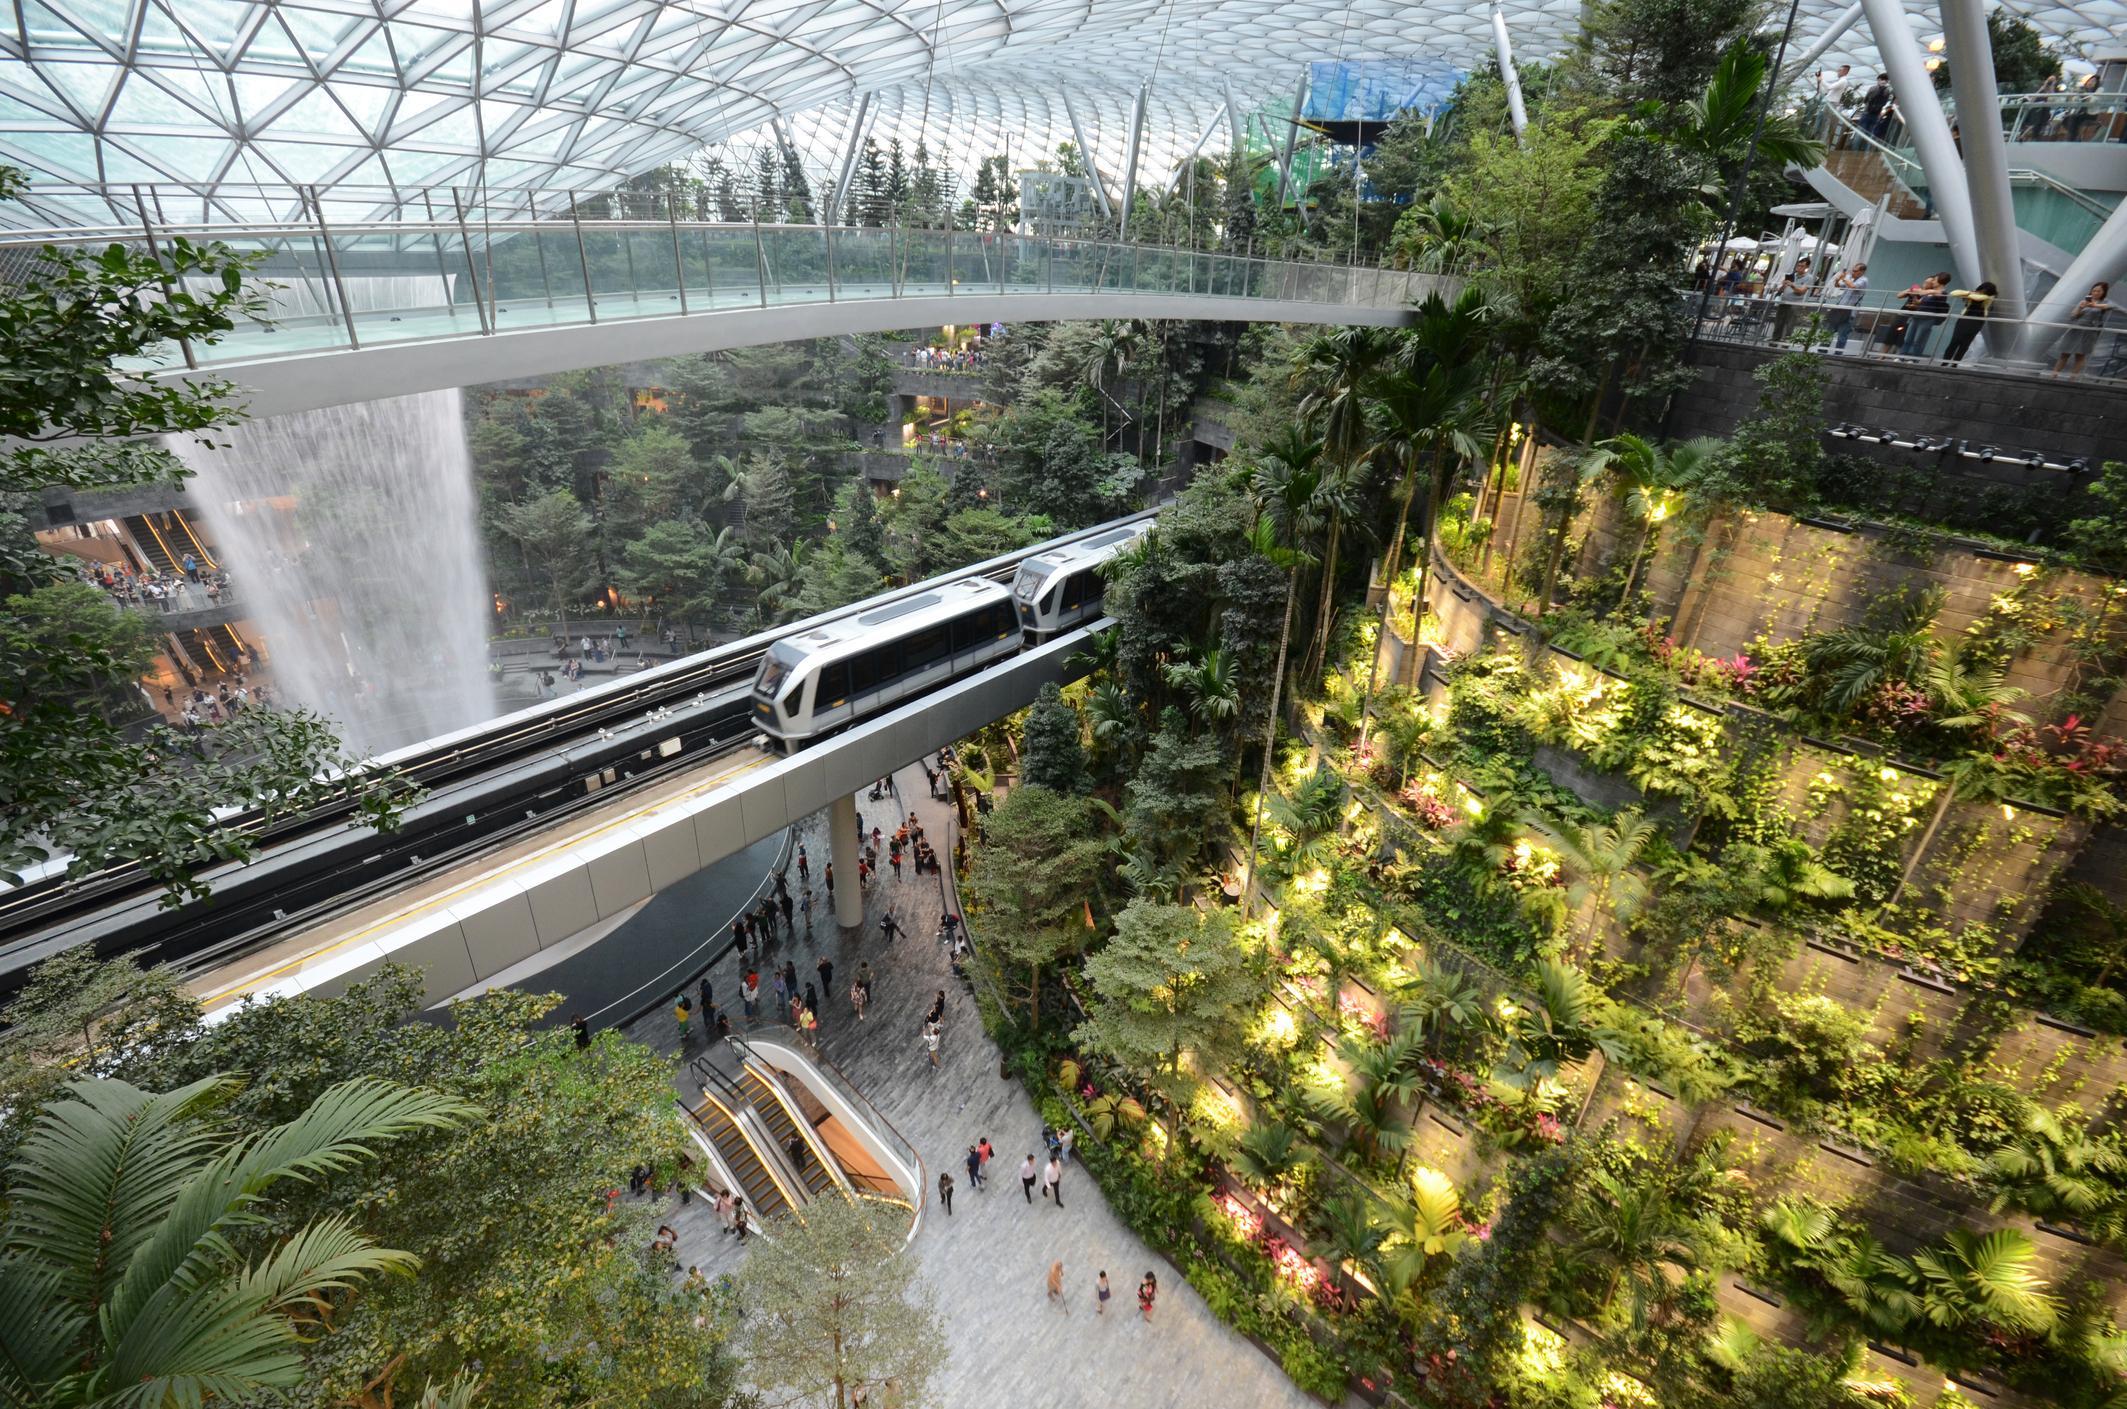 Singapore: New Jewel Changi Airport is a treat for jungle